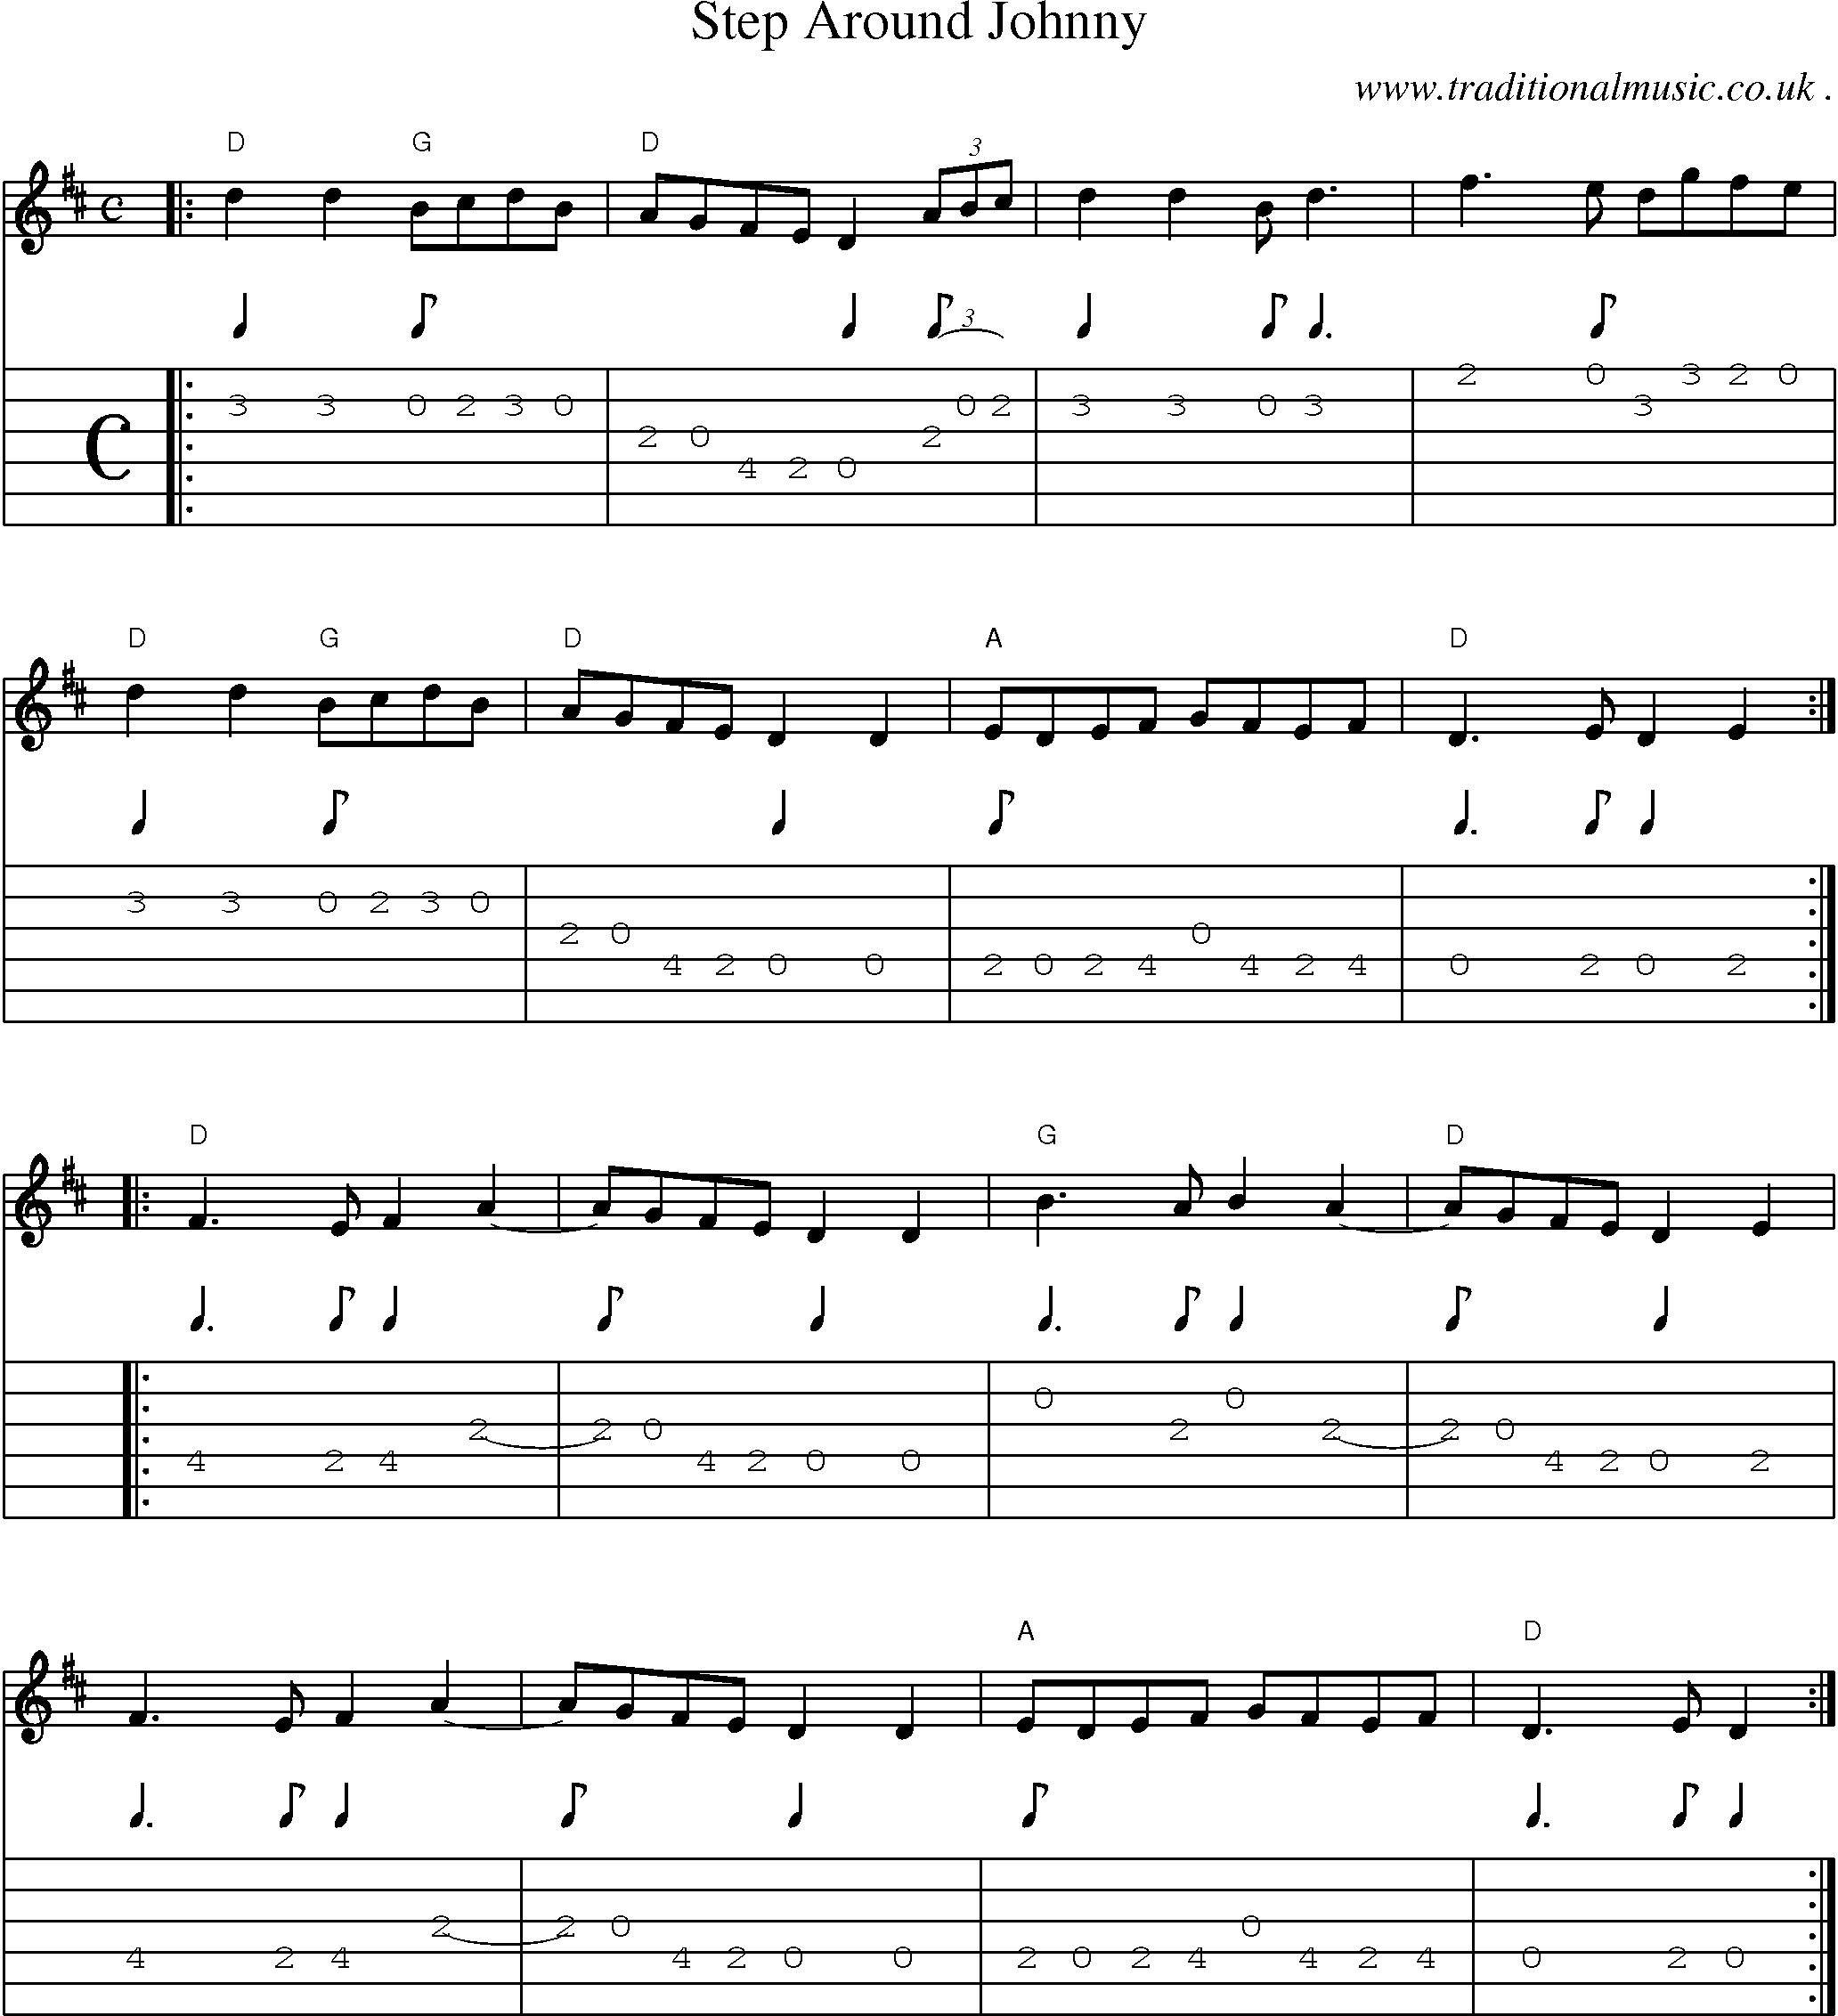 Music Score and Guitar Tabs for Step Around Johnny